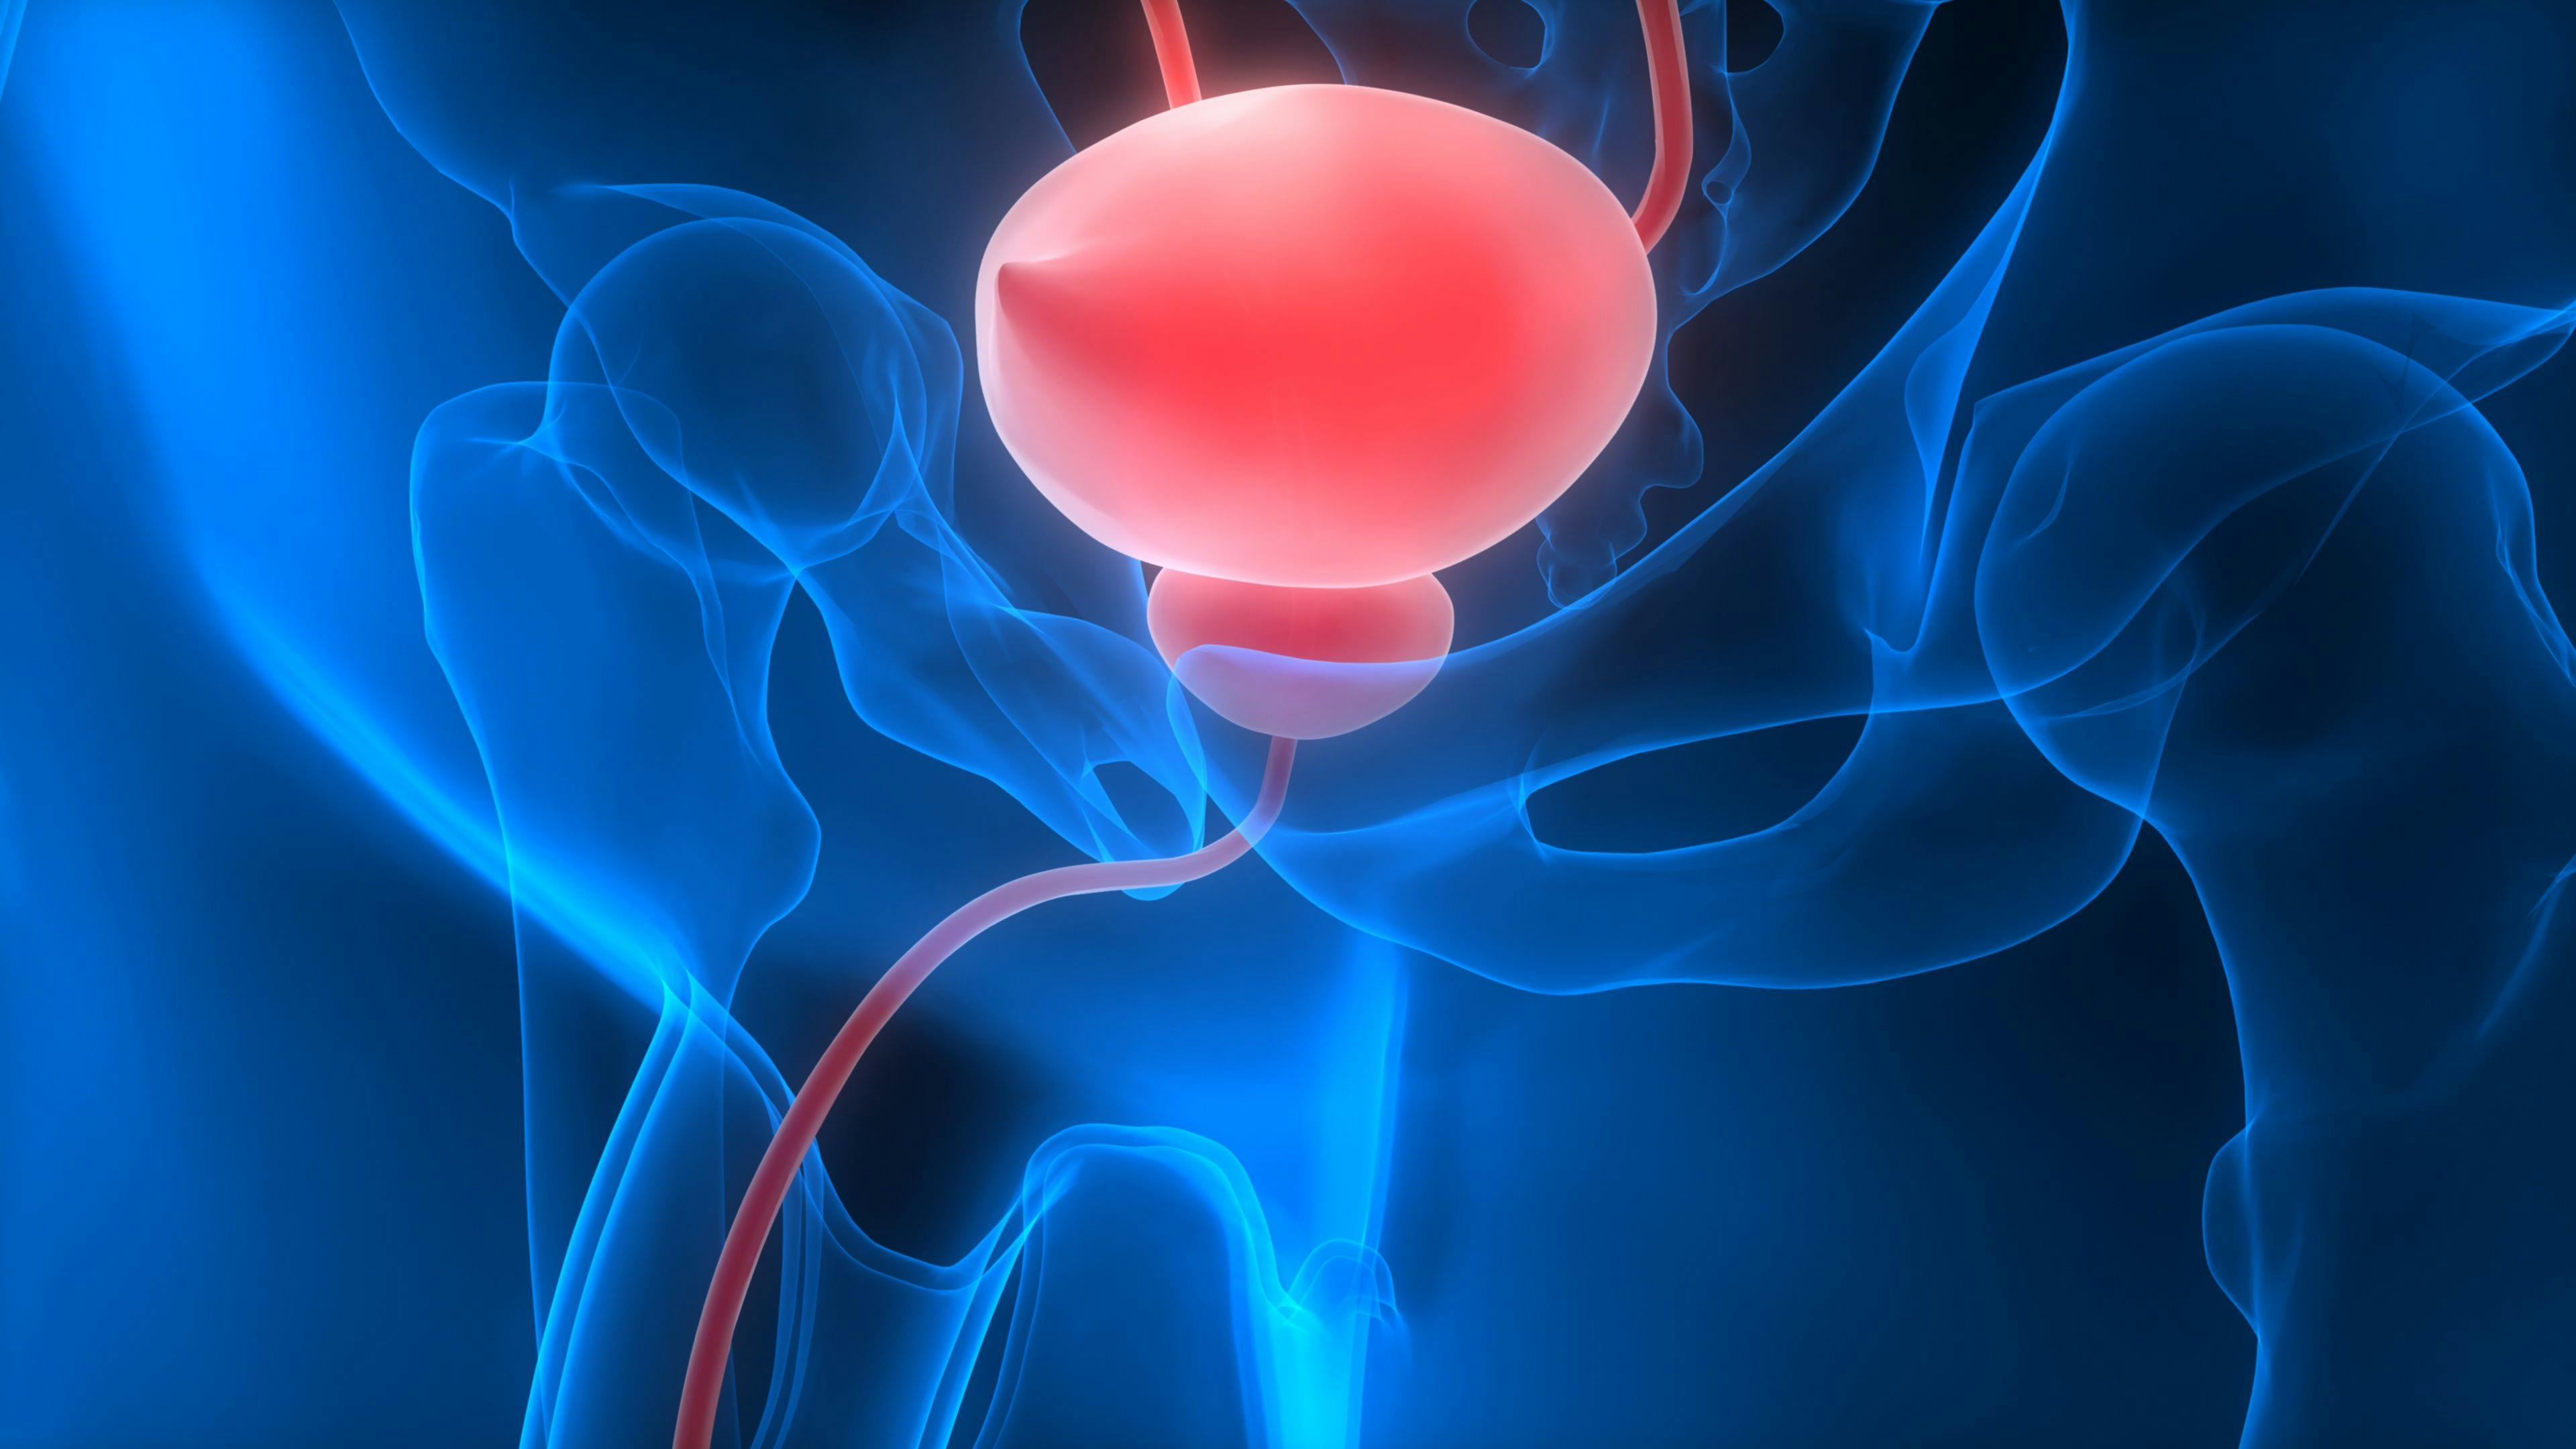 Updated Standard Practice for Managing Patients with Non-Muscle-Invasive Bladder Cancer